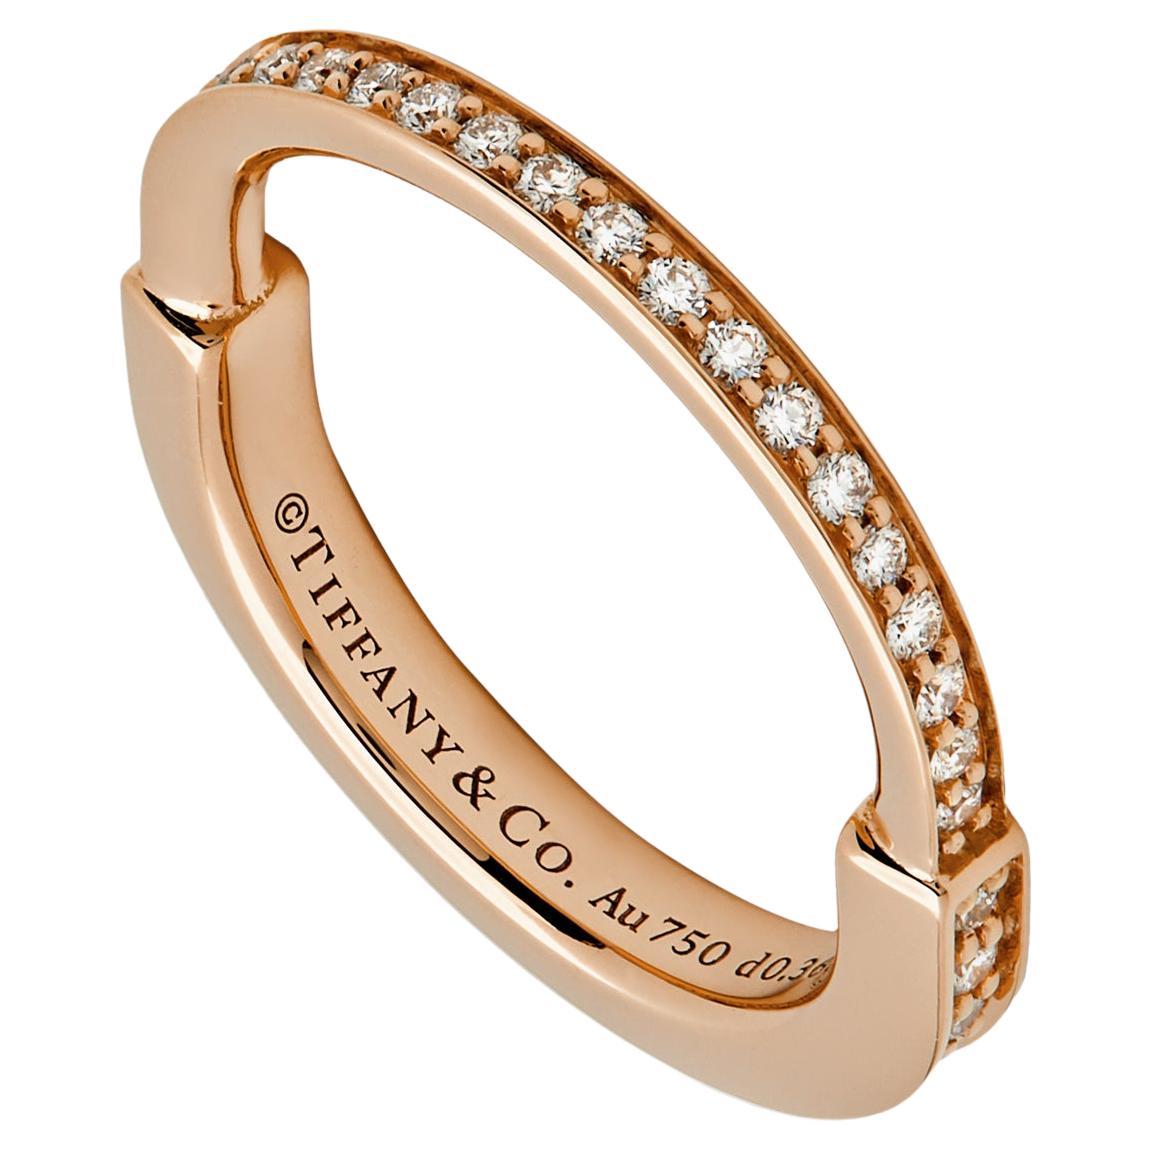  Tiffany & Co. Lock Ring in Rose Gold with Pavé Diamonds 72791584 For Sale